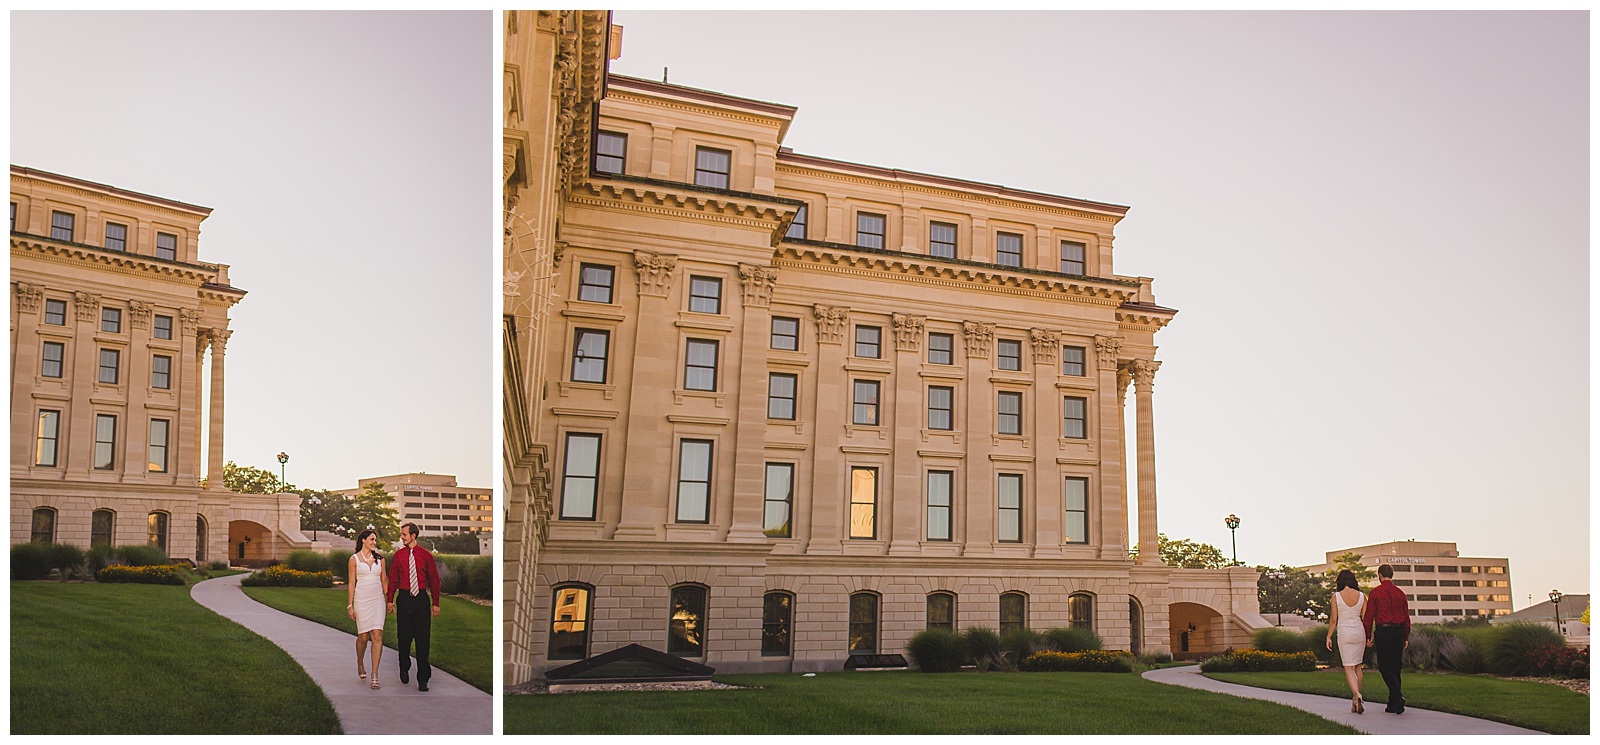 An engagement session at the Kansas State Capitol Building in Topeka.